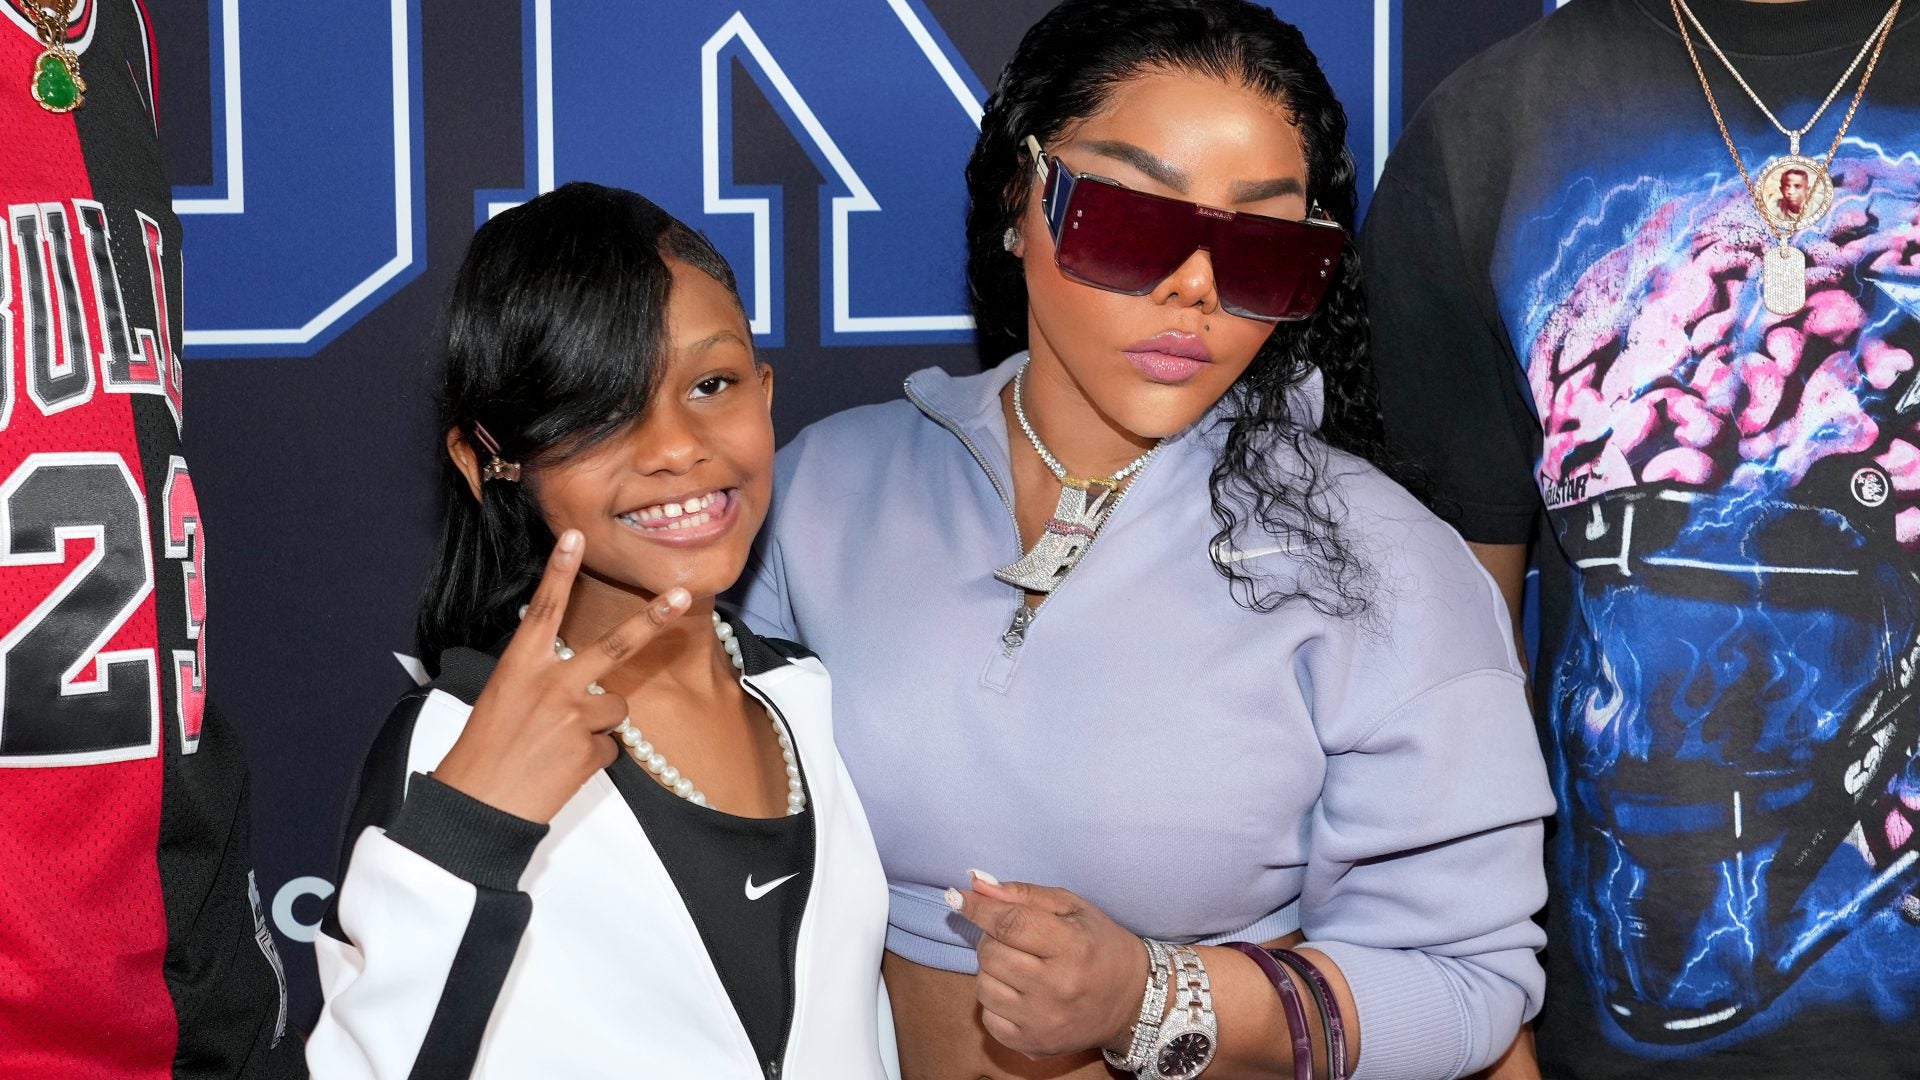 Lil Kim’s Daughter Just Turned 10 And She's Twinning With Her Mom To Celebrate